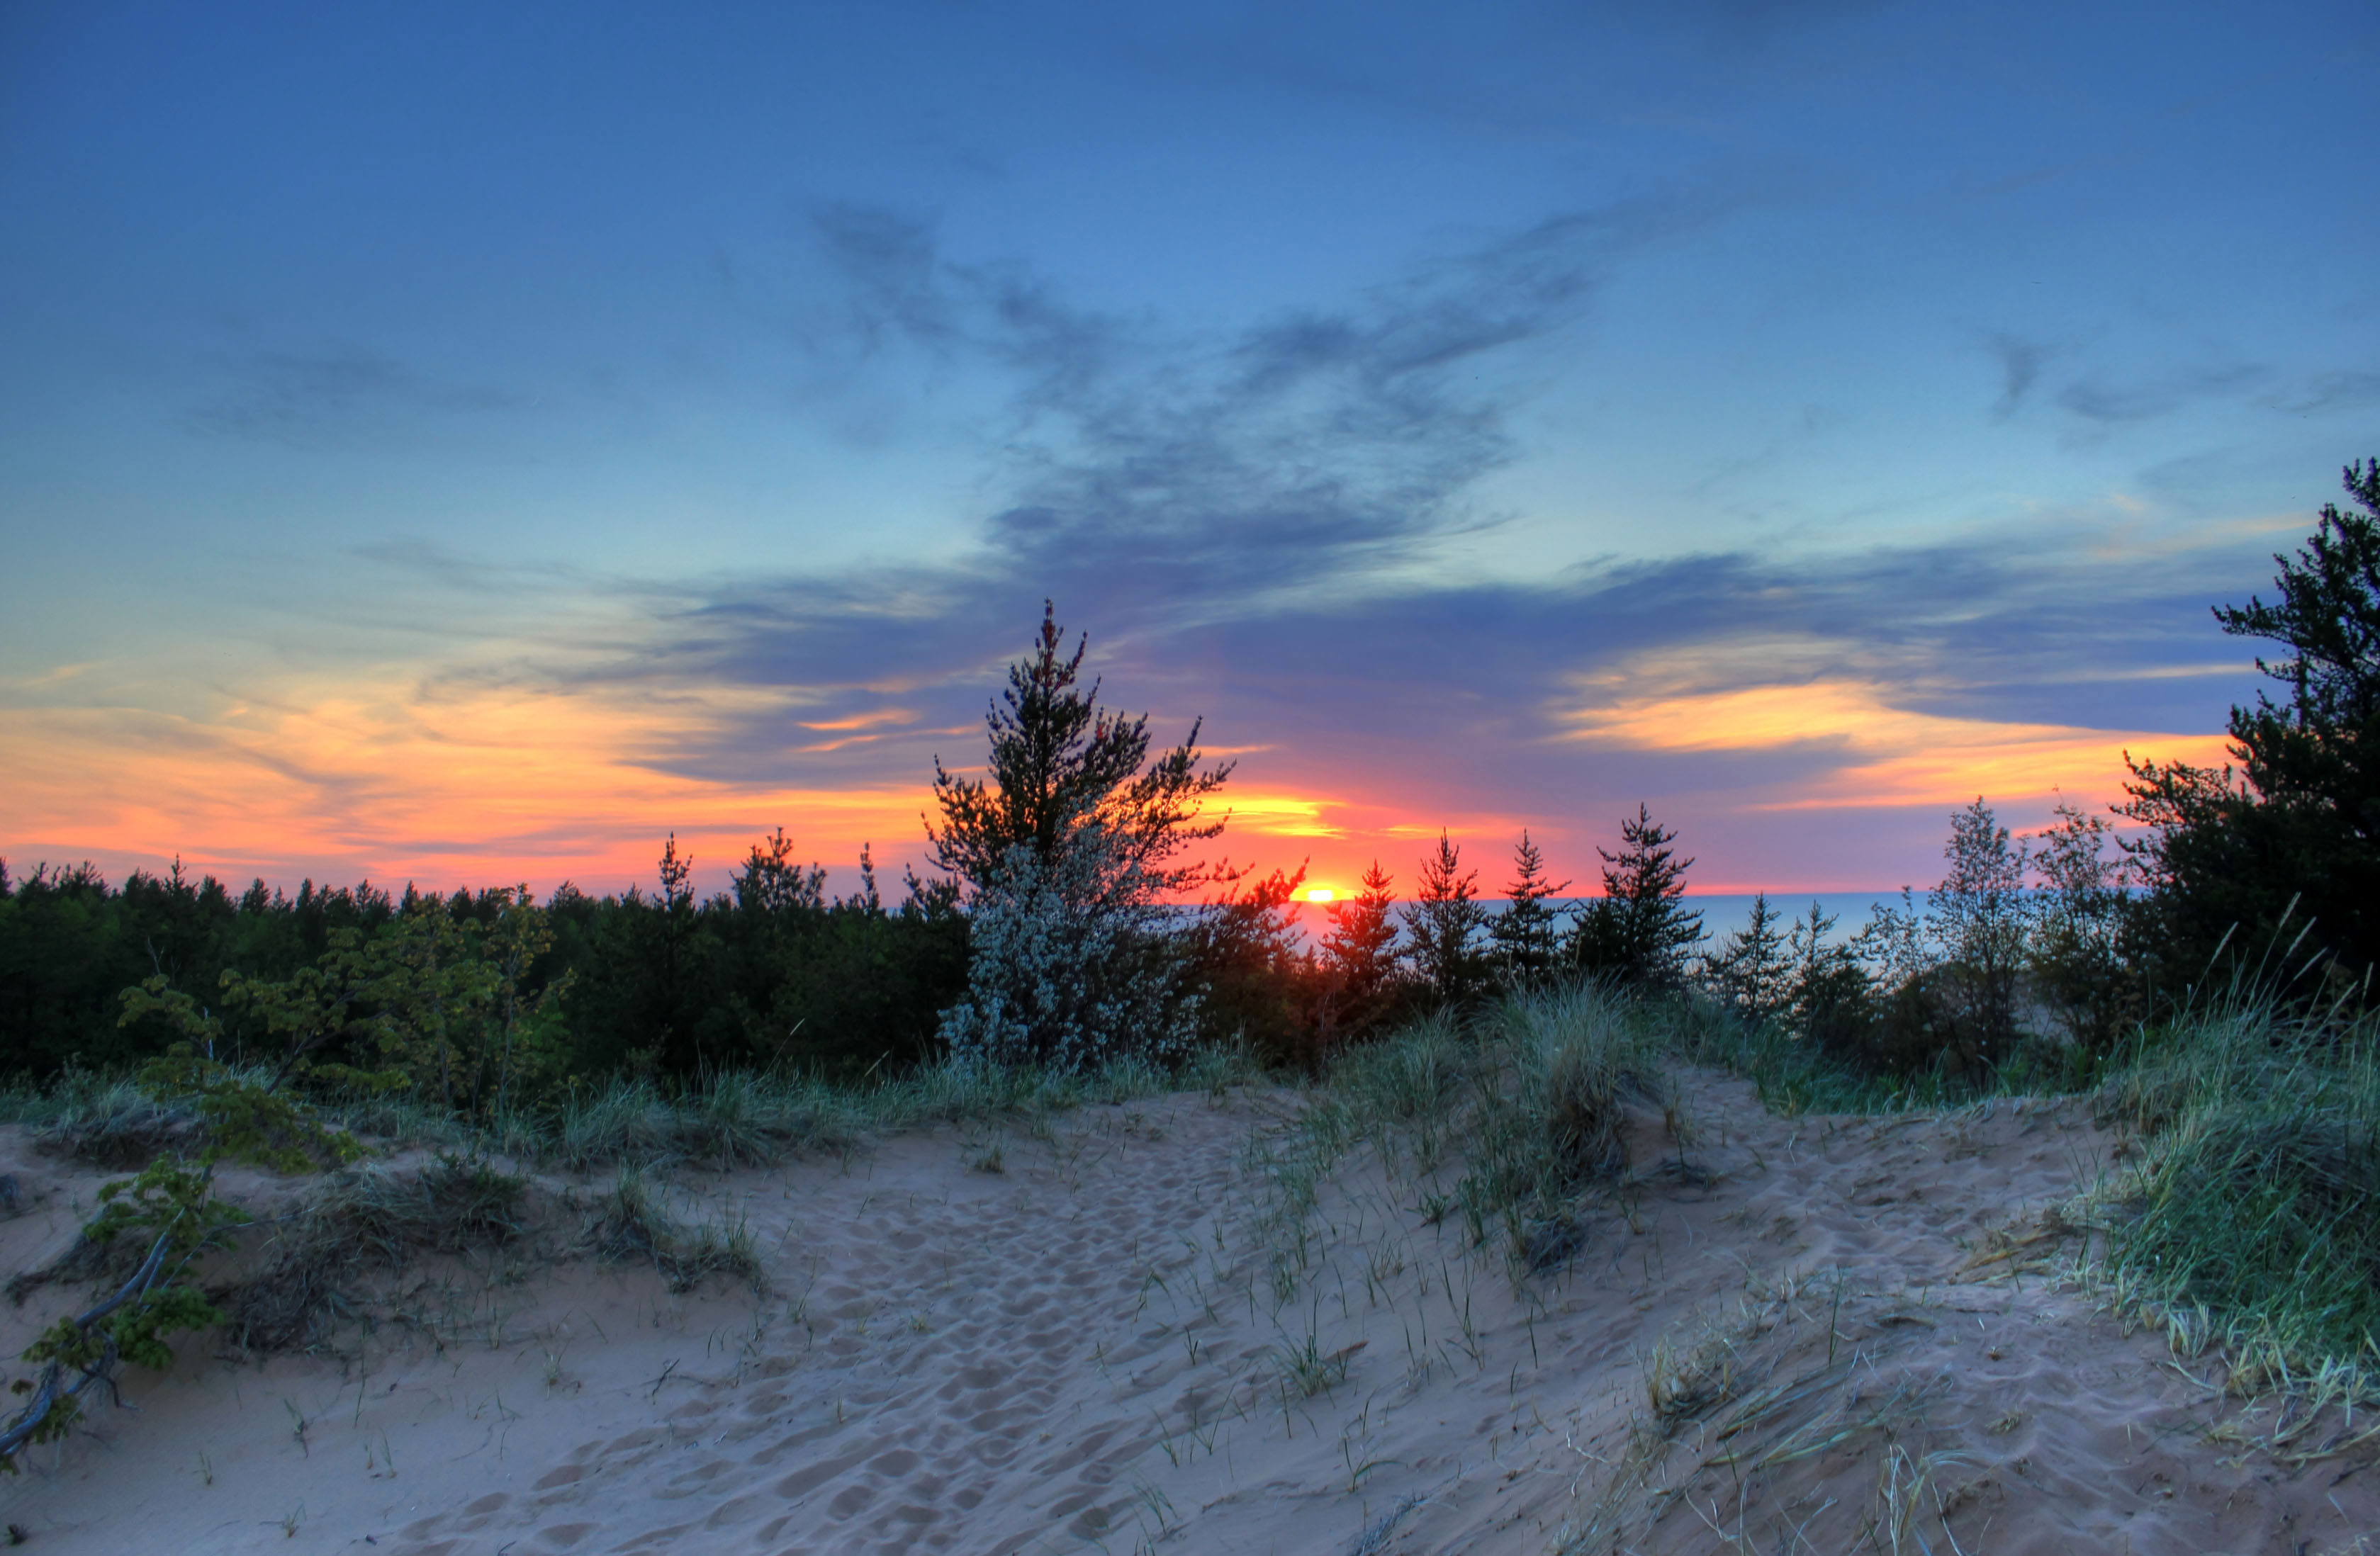 Sunset over the Dunes